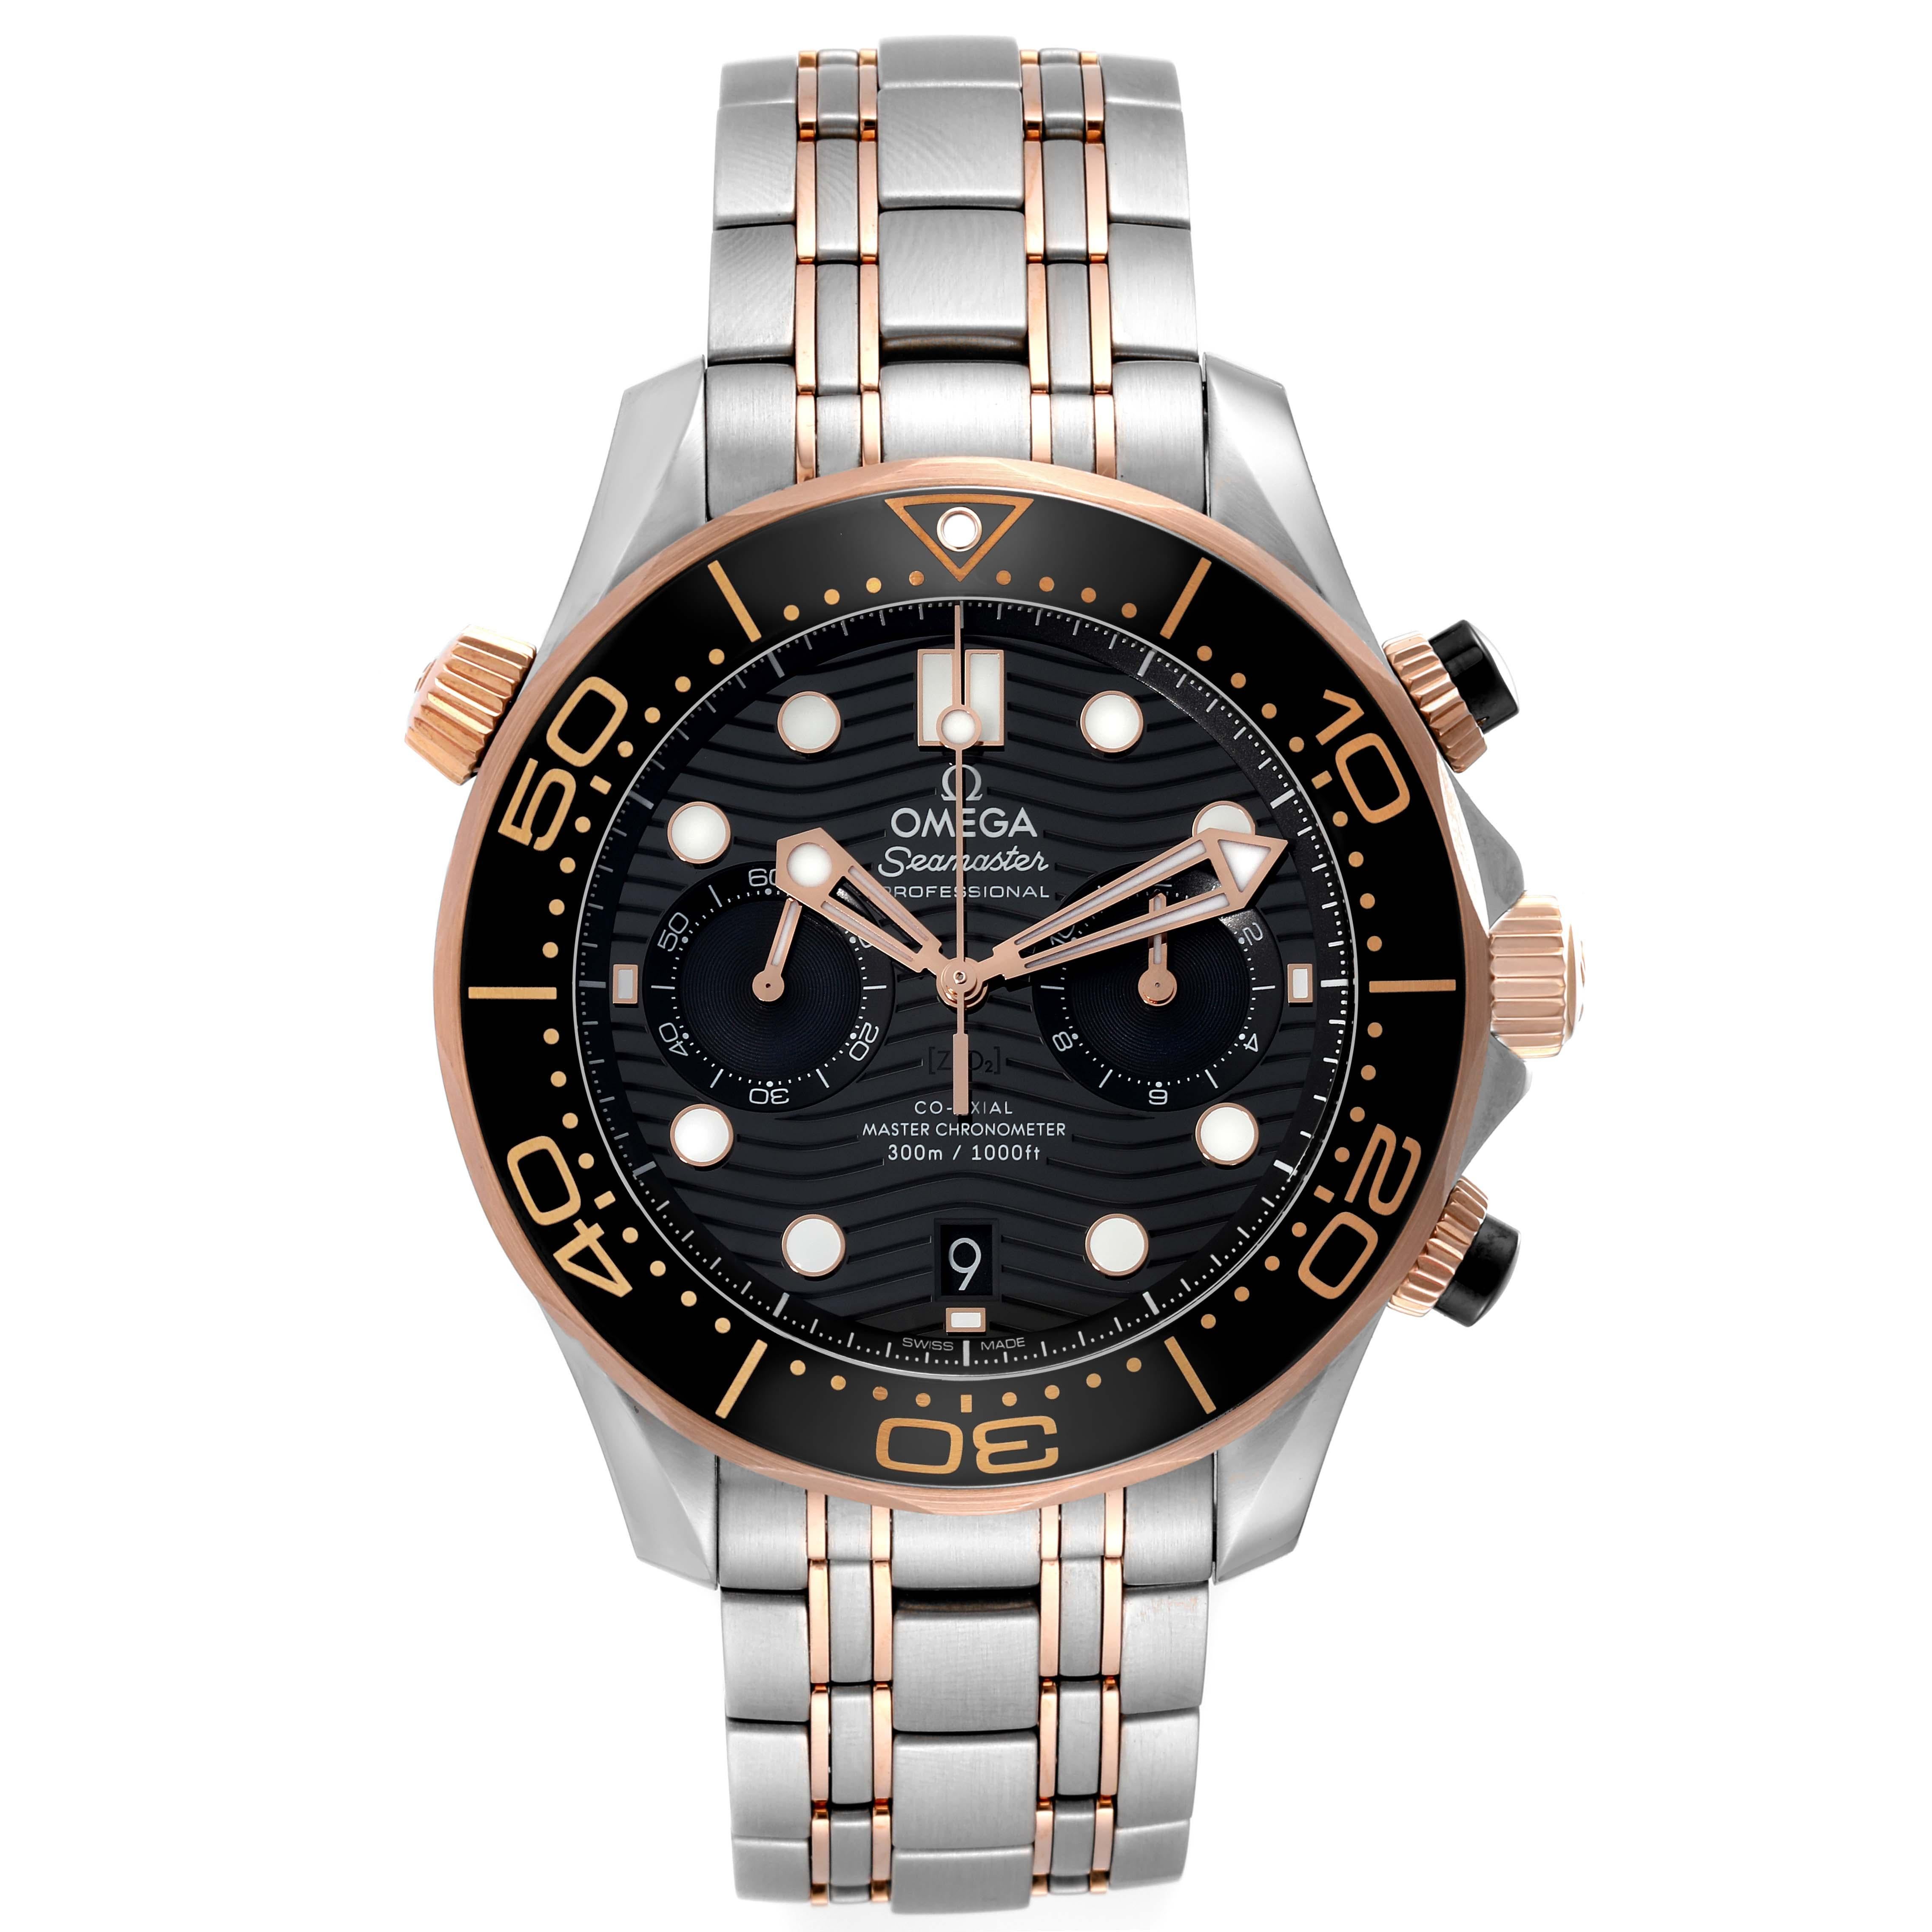 Omega Seamaster Diver Steel Rose Gold Mens Watch 210.20.44.51.01.001 Box Card. Automatic Self-winding chronograph movement with column wheel and Co-Axial escapement. Certified Master Chronometer, approved by METAS, resistant to magnetic fields